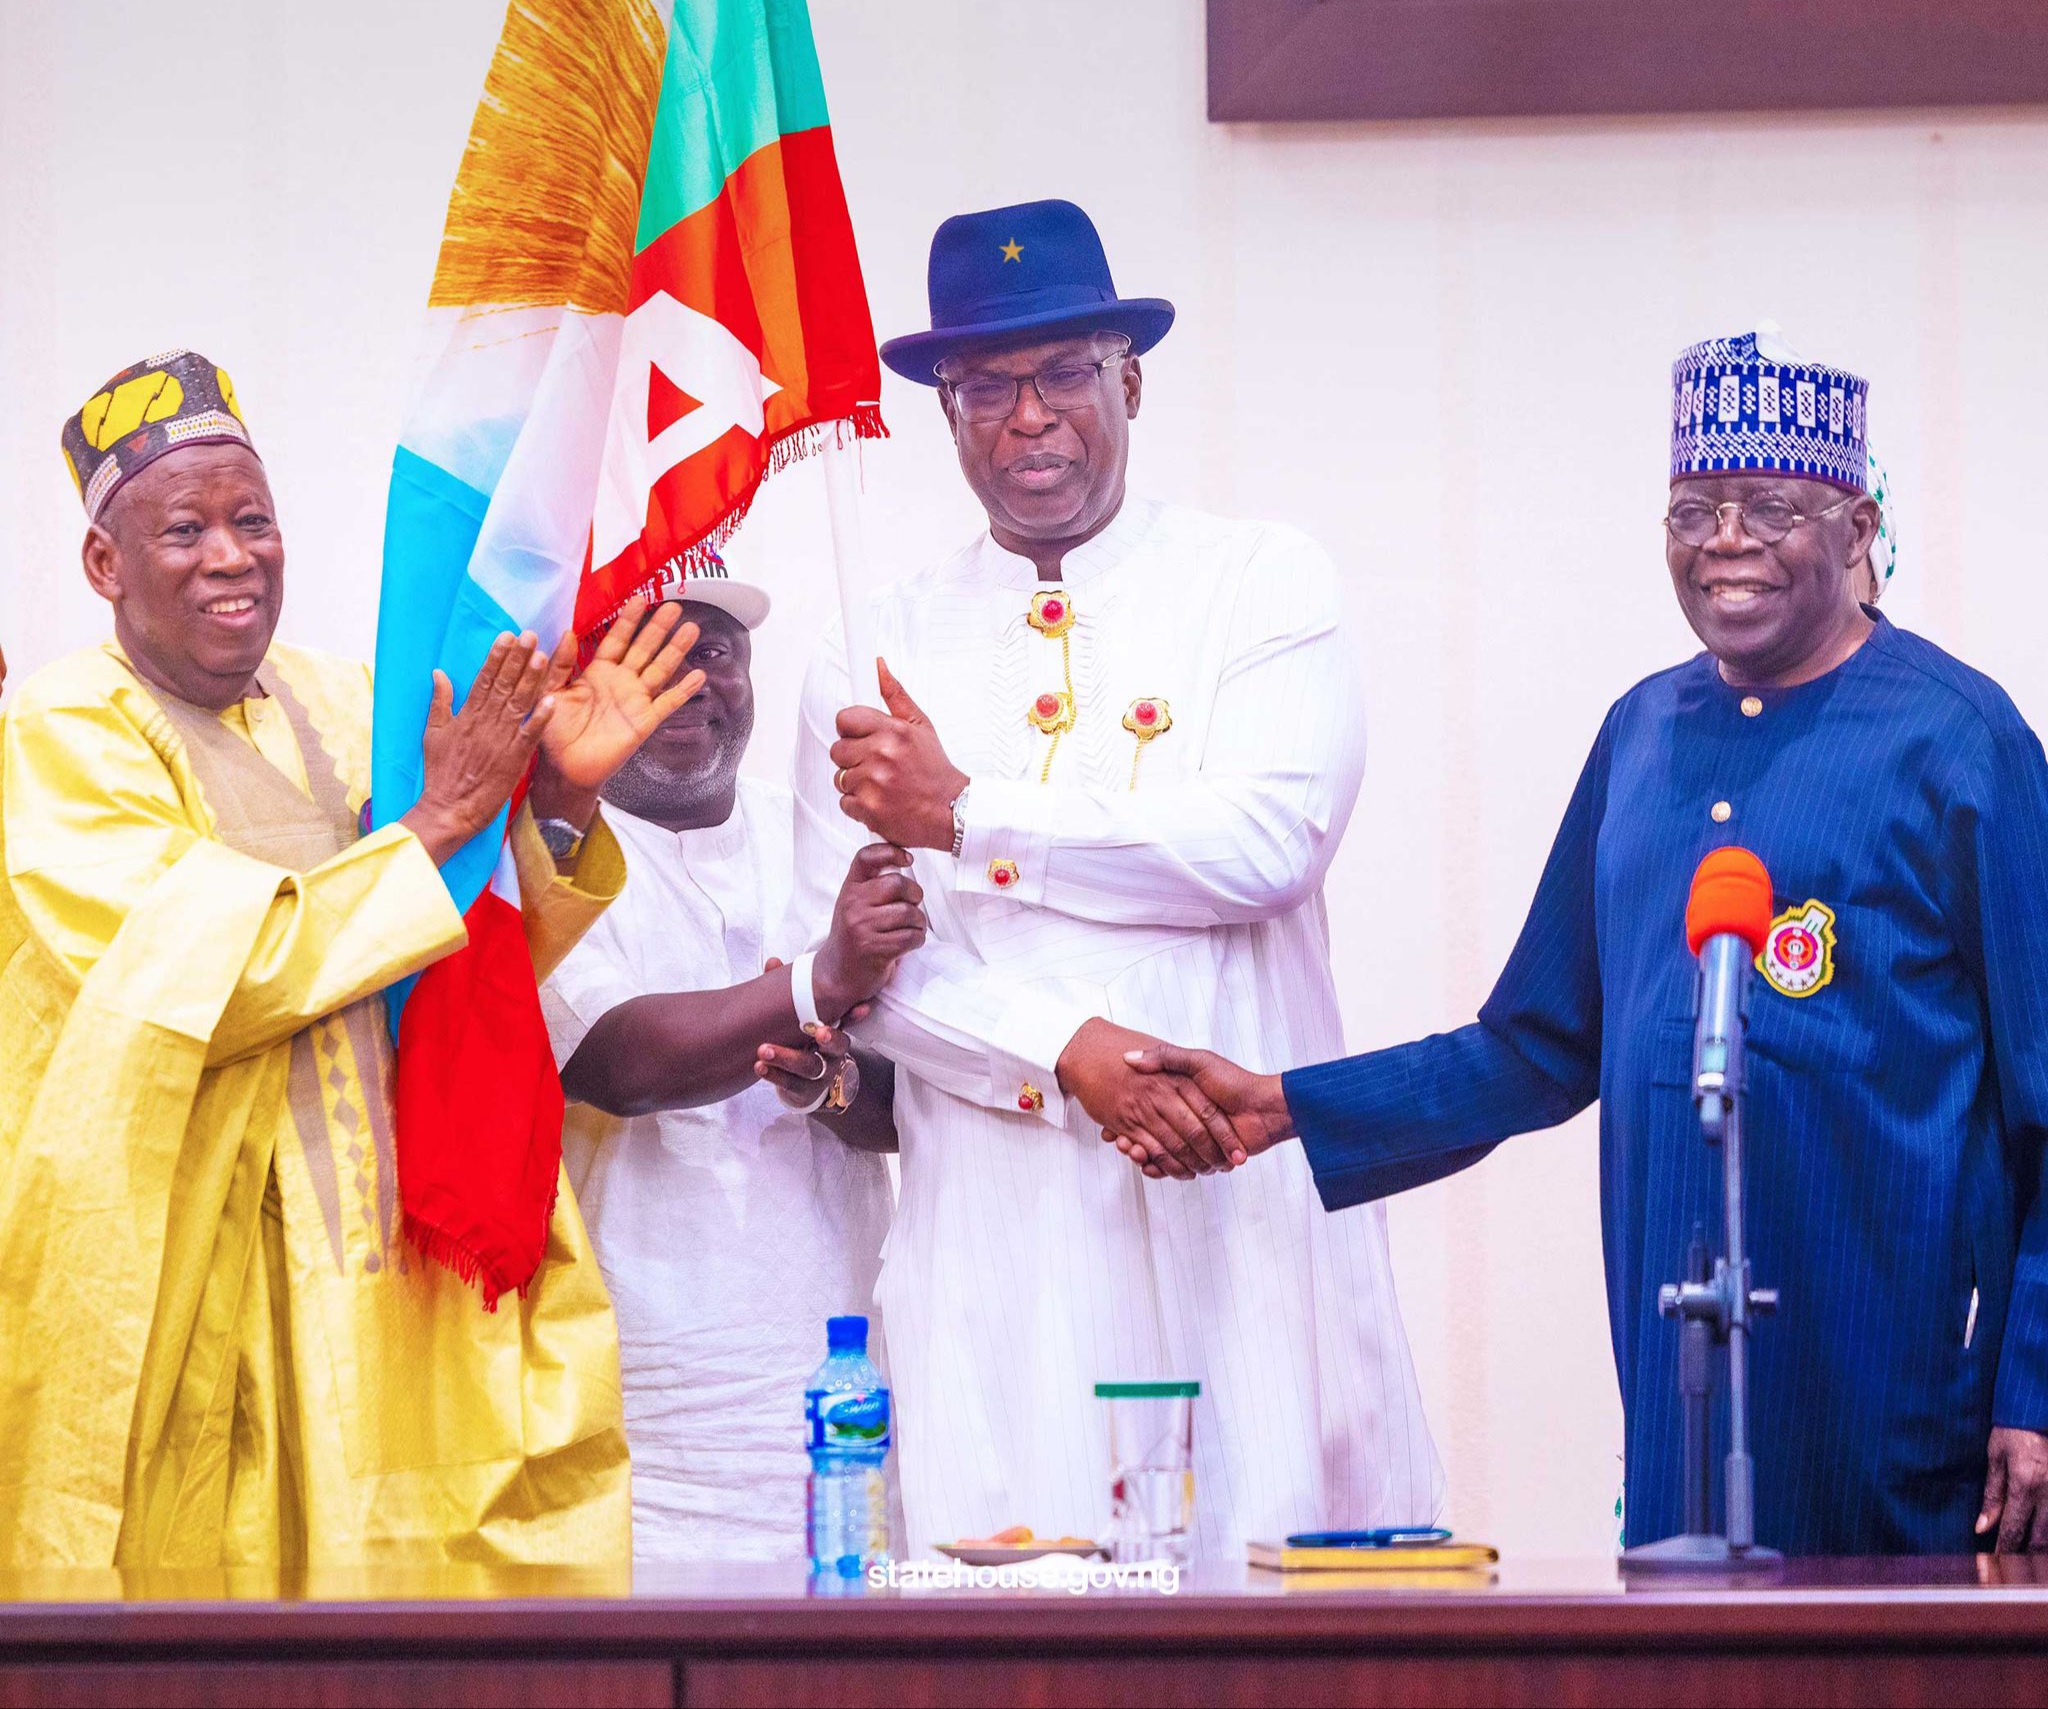 President Bola Tinubu hands the APC flag to the party's governorship candidate in Bayelsa State, Chief Timipre Sylva